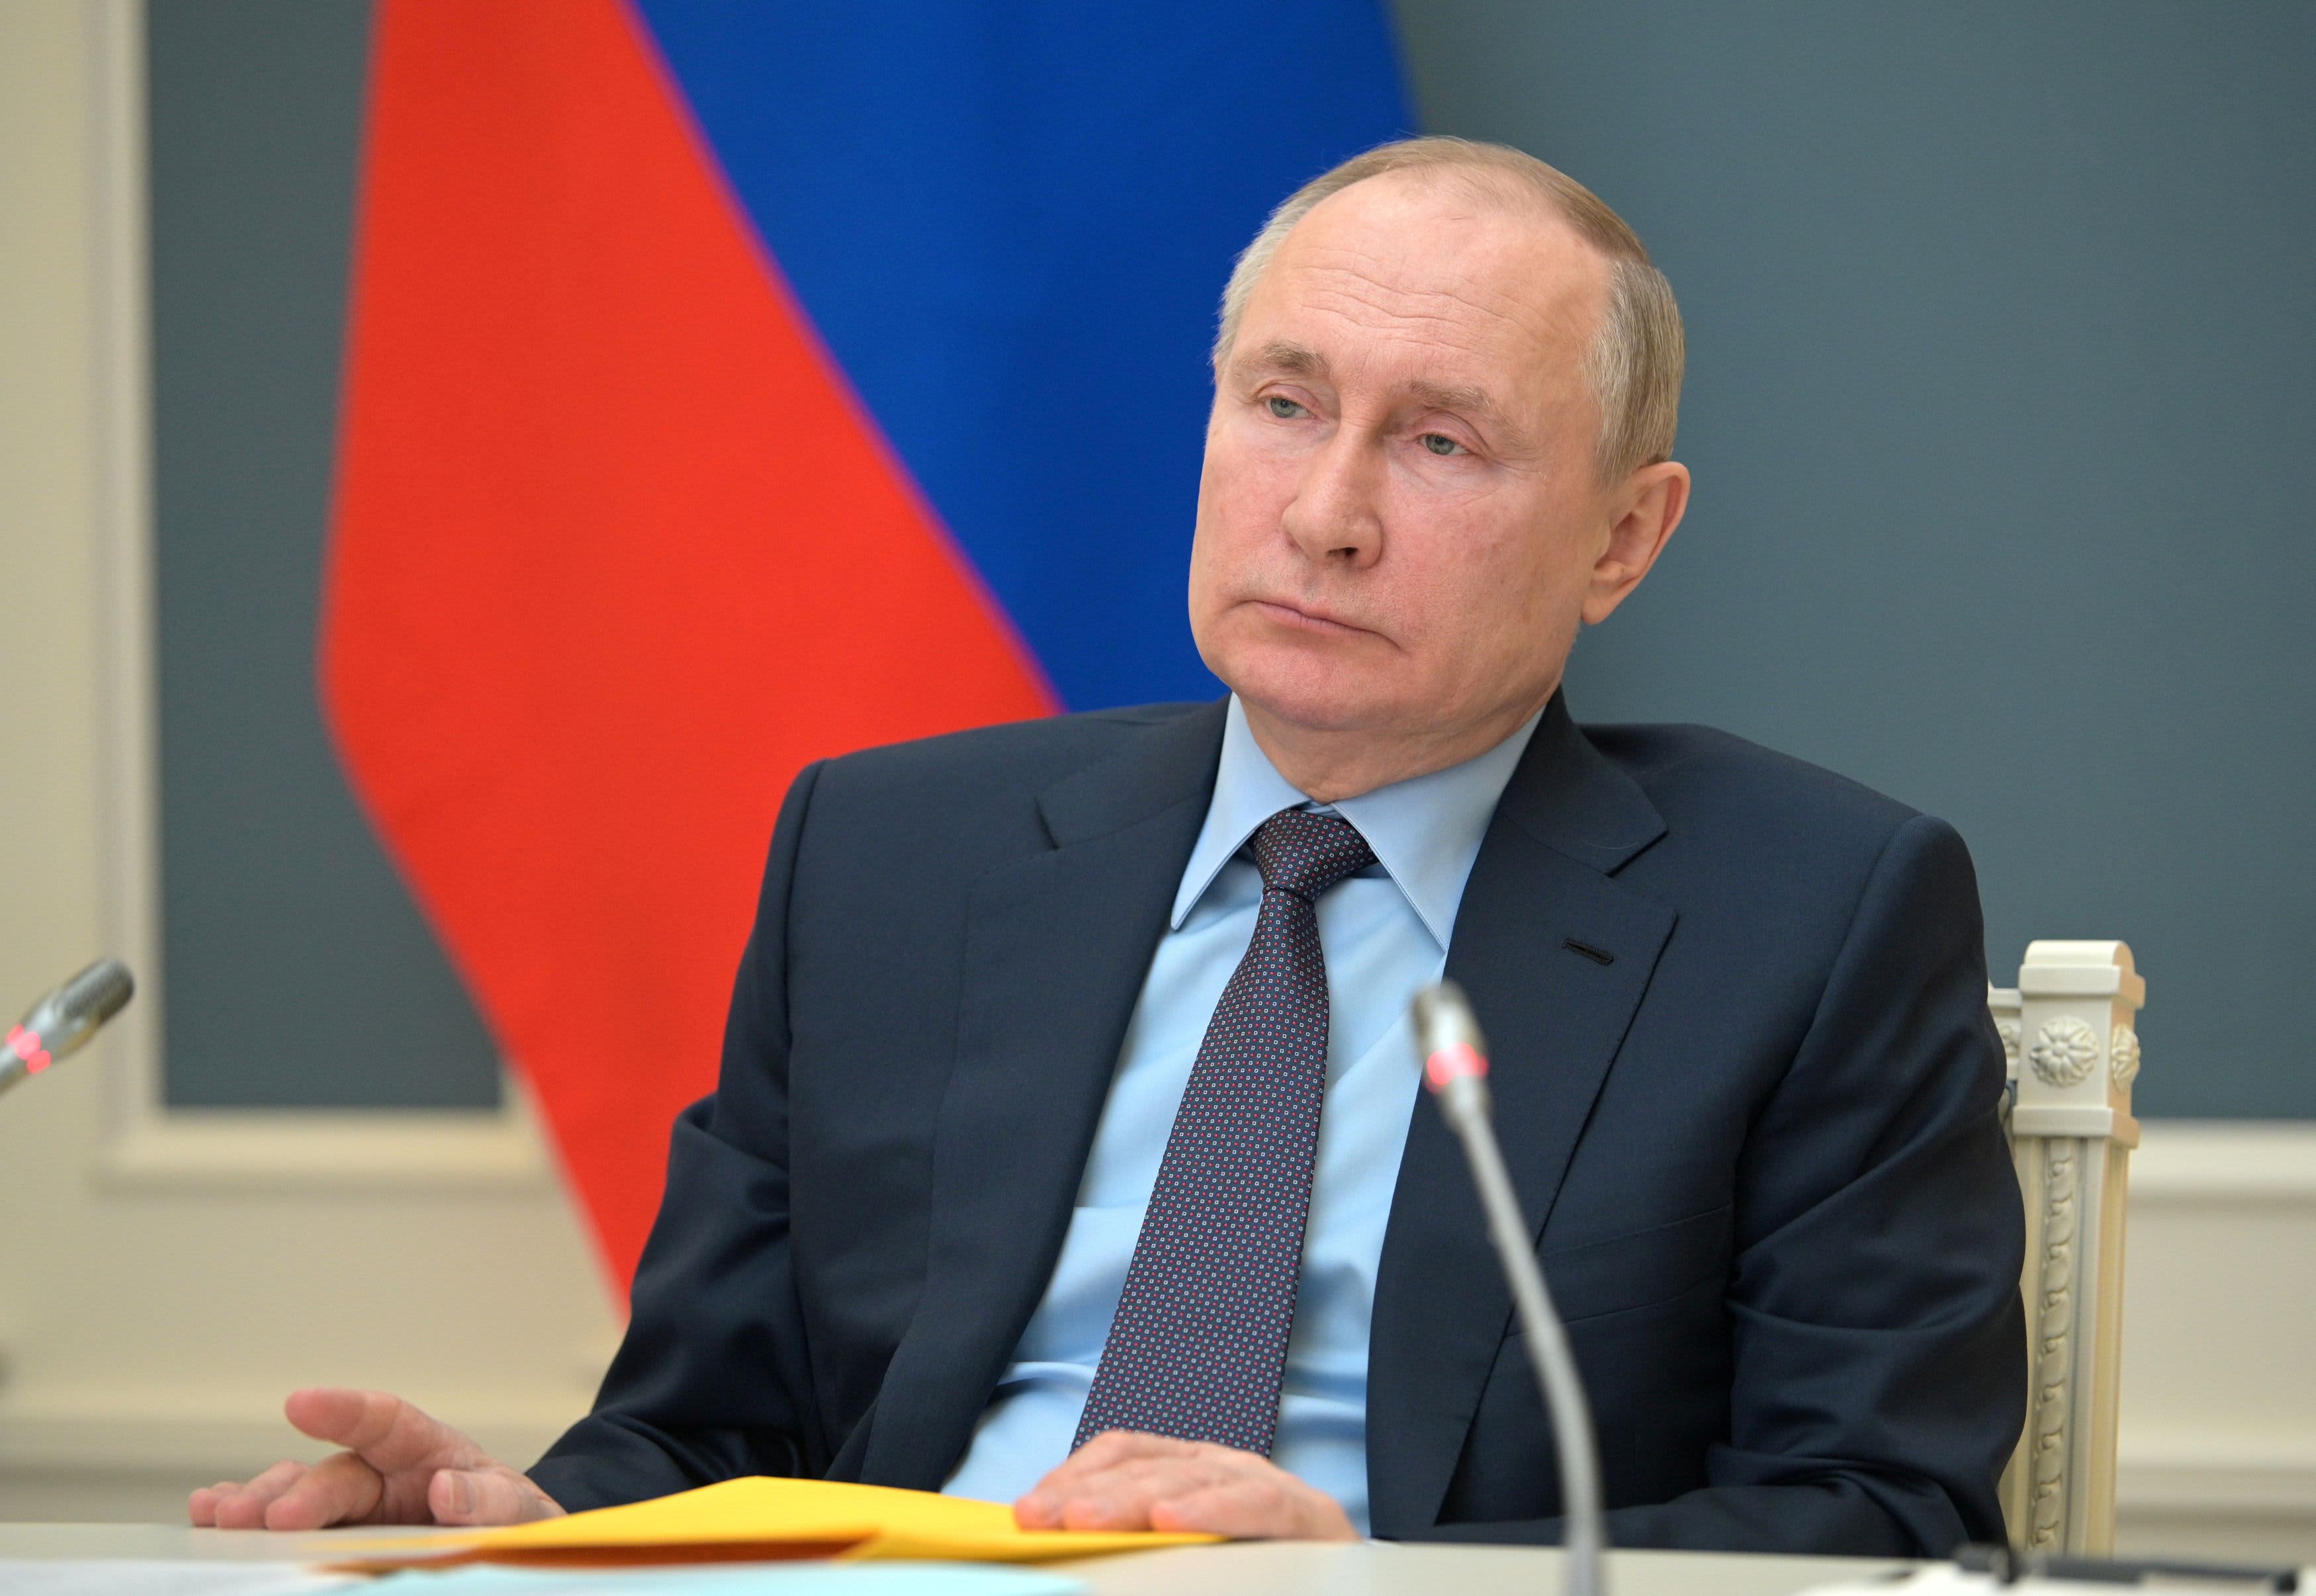 $100 oil is ‘quite possible’ Russia’s Putin says – CNBC